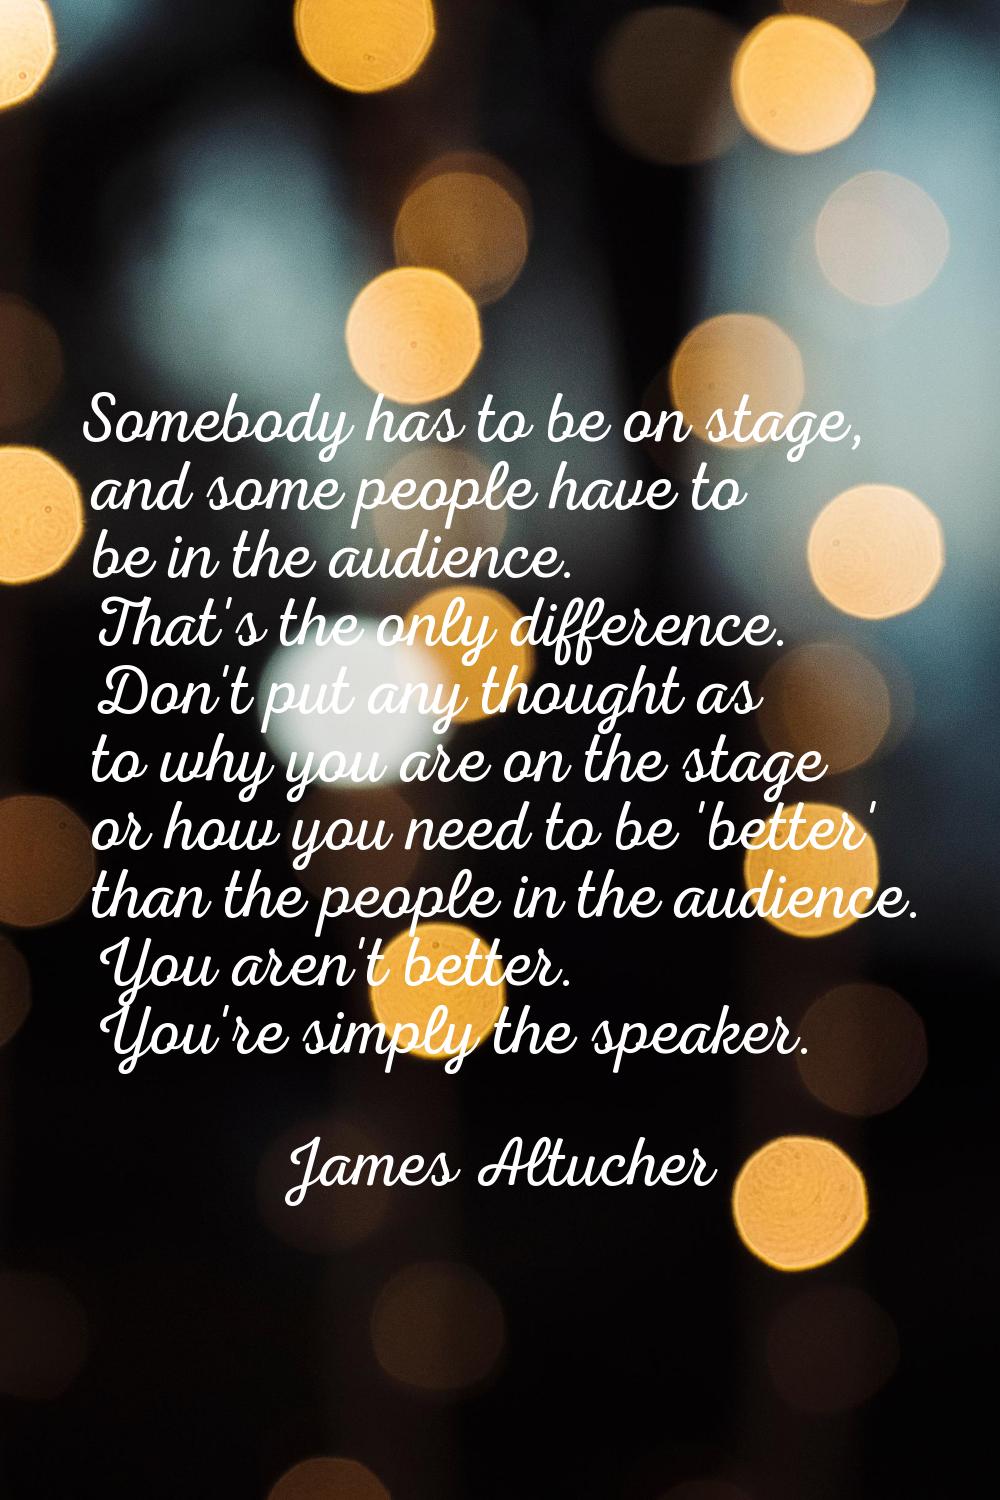 Somebody has to be on stage, and some people have to be in the audience. That's the only difference